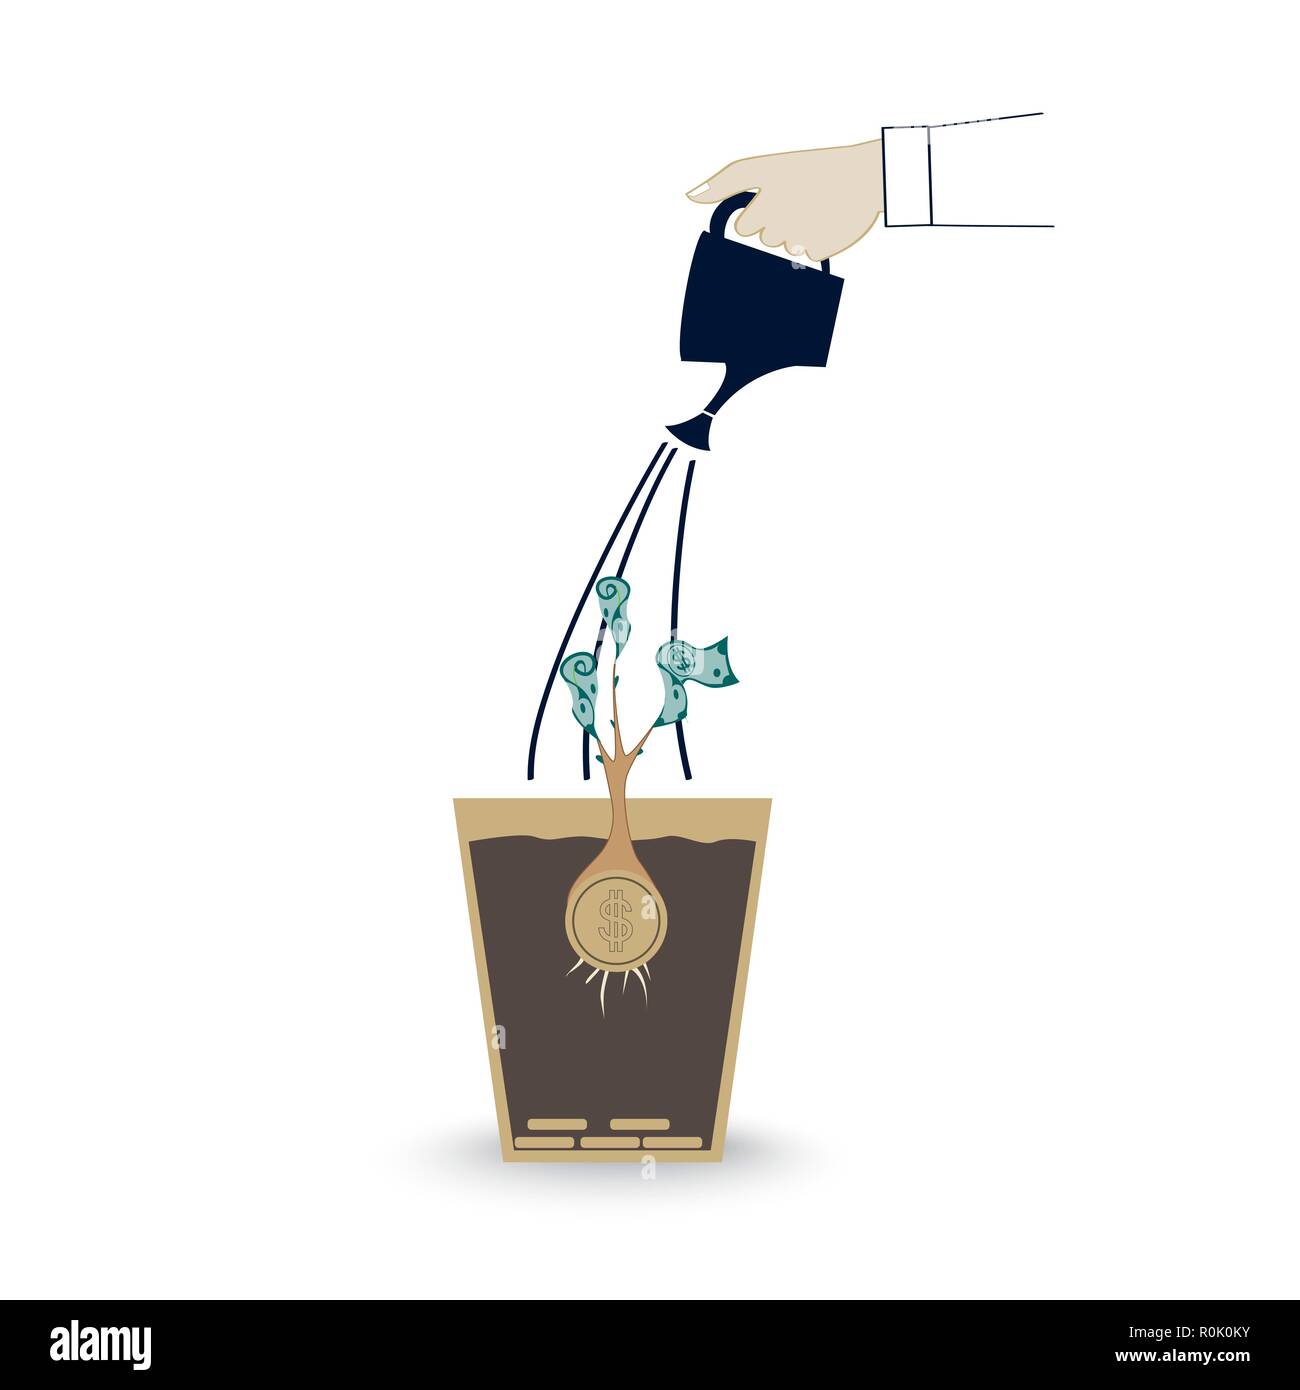 Hand of business person watering money tree in the pot. Making money, financial management concept. Stock Vector